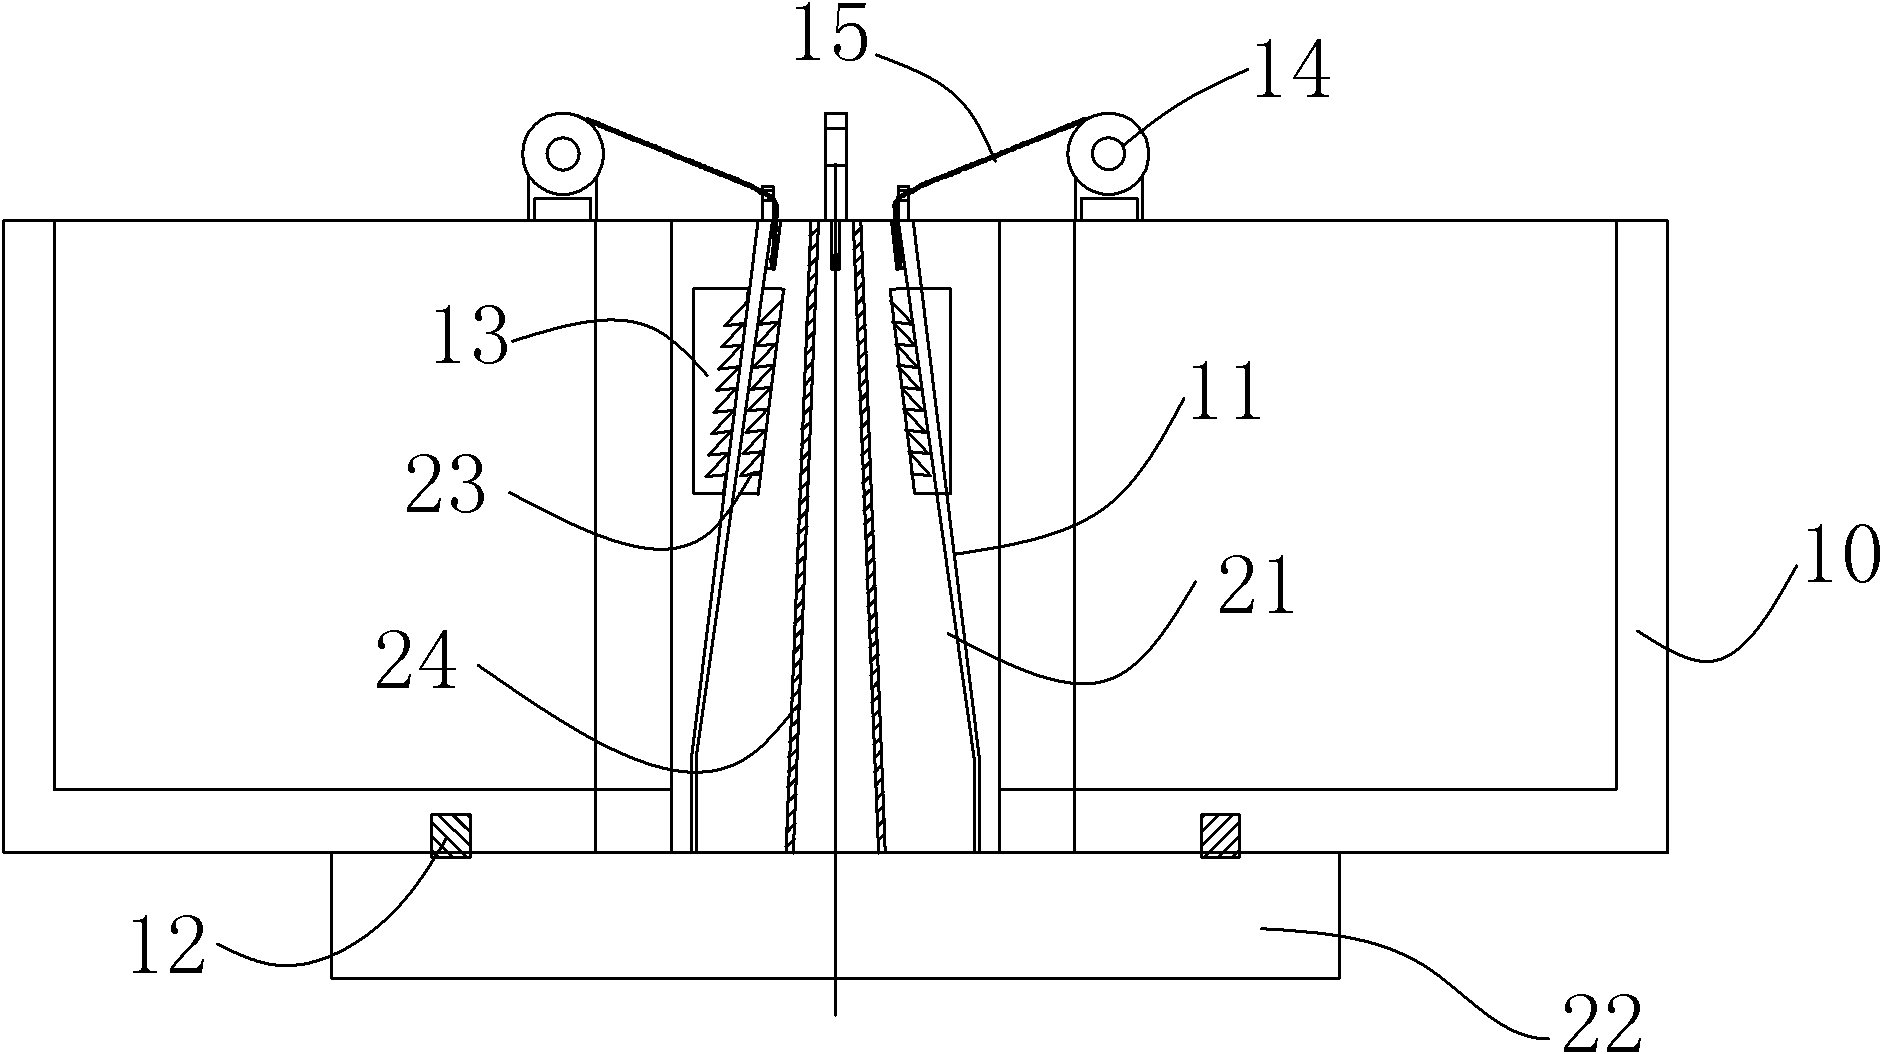 Connection structure capable of disconnecting floating production storage and offloading (FPSO) mooring floater and boat body